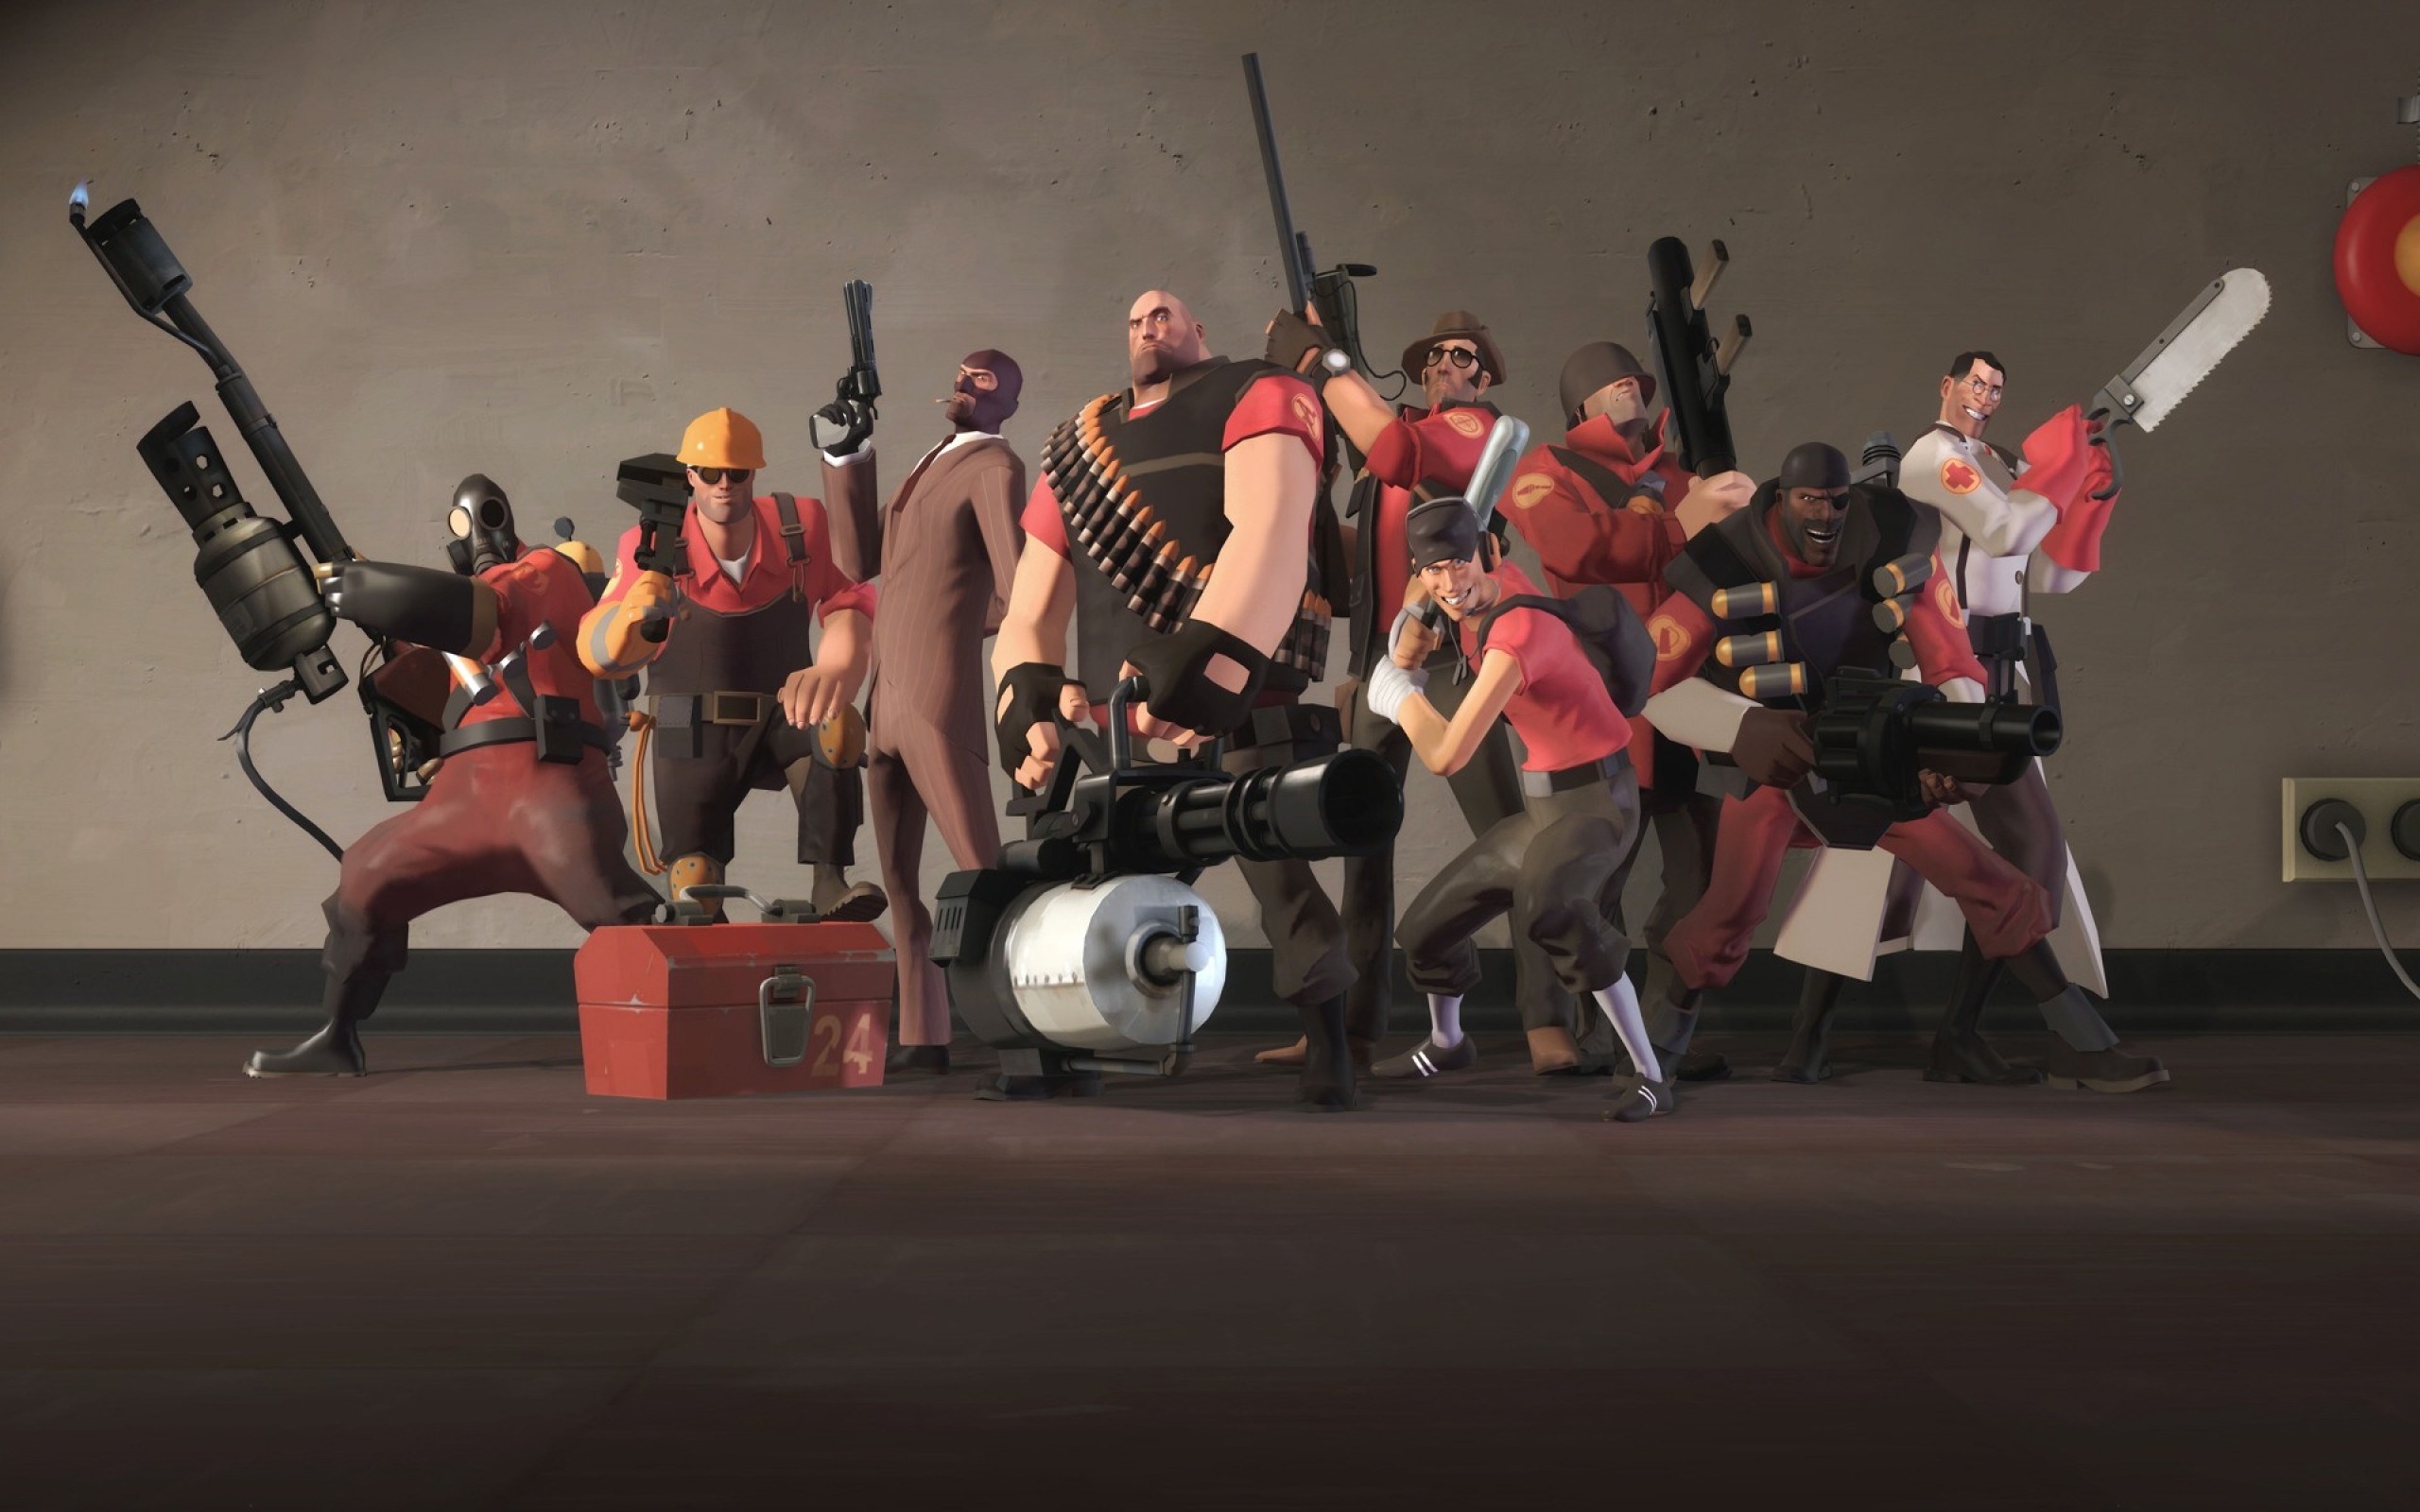 2560x1600 game free team fortress 2 wallpapers artwork tablet background wallpapers  smart phones colourful samsung phone wallpapers widescreen 1080p 2560Ã1600  ...